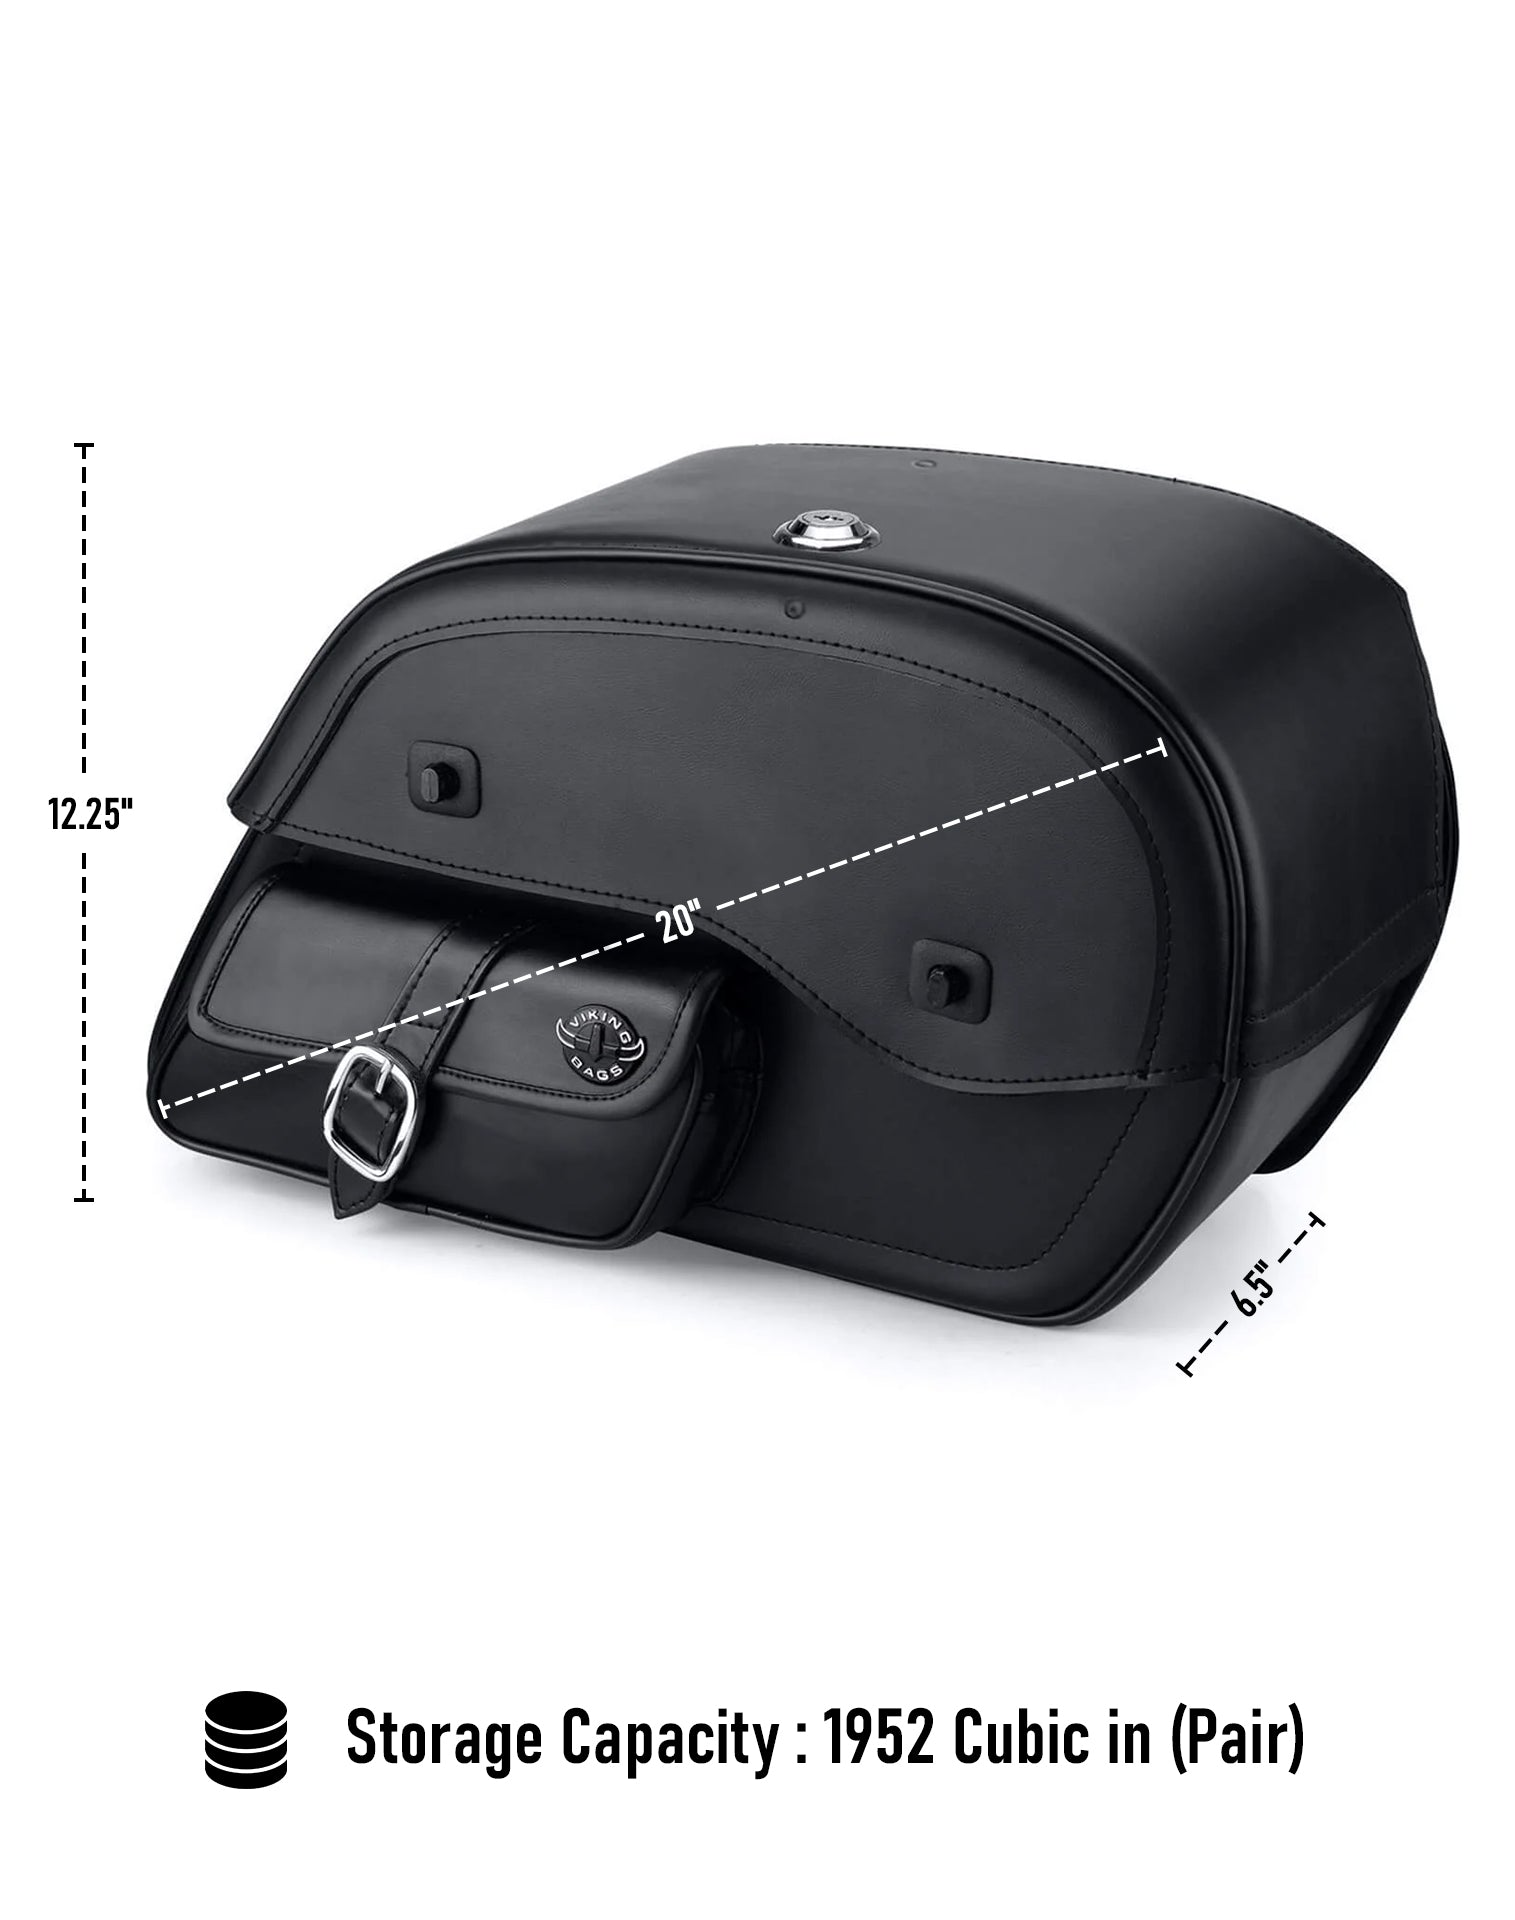 Viking Essential Side Pocket Large Triumph Thunderbird Leather Motorcycle Saddlebags Can Store Your Ridings Gears